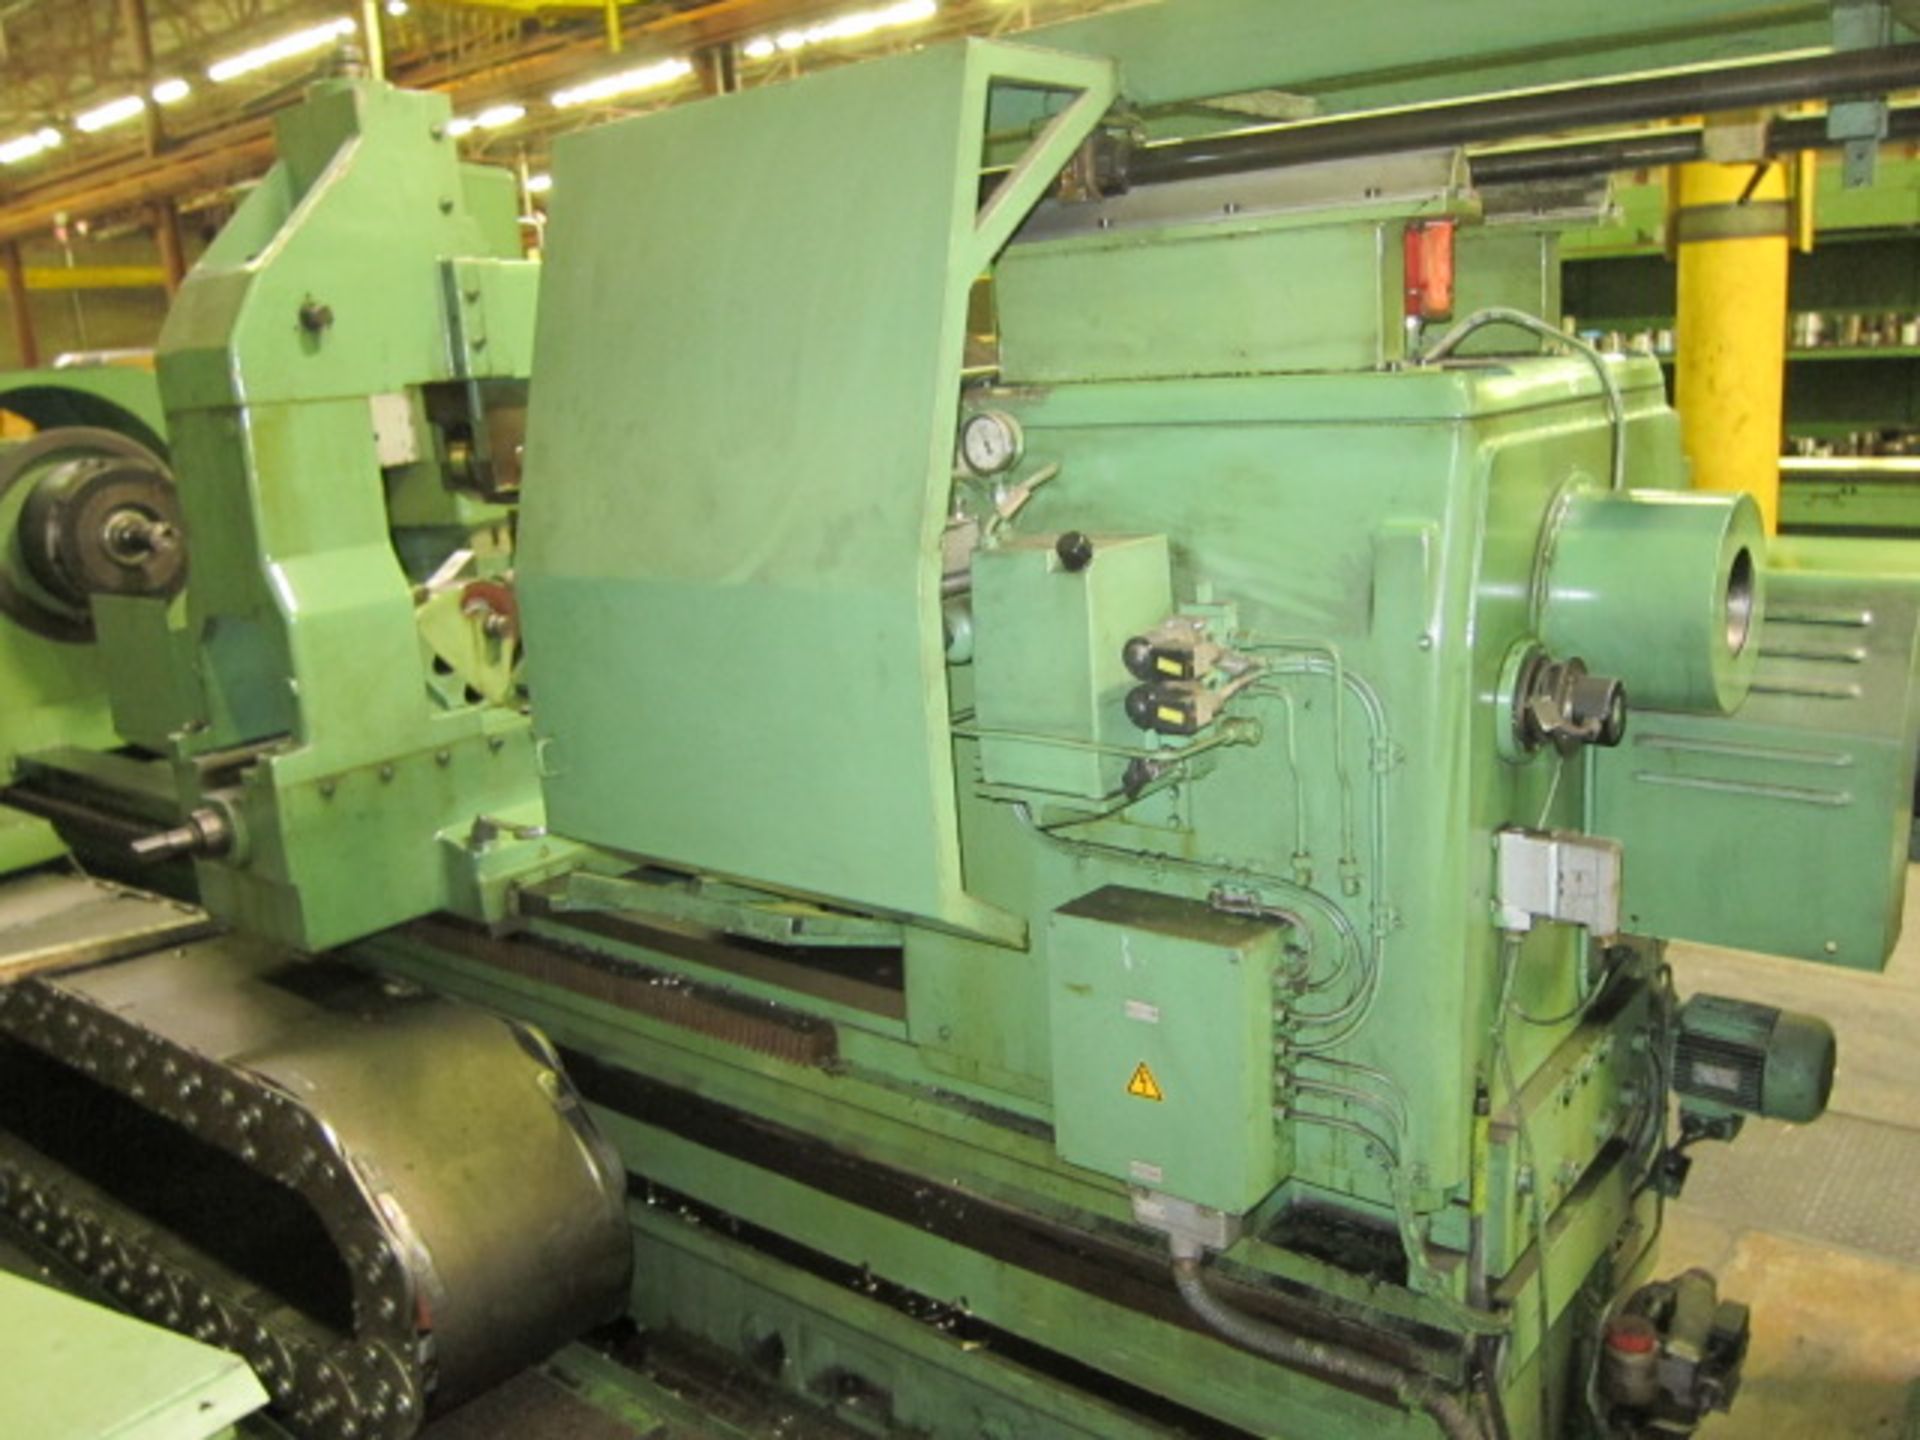 COUNTER ROTATING DEEP HOLE BORING MACHINE, WOHLENBERG MDL. PB2-1000 X 11M, new 1995, 39.37” sw. over - Image 25 of 38